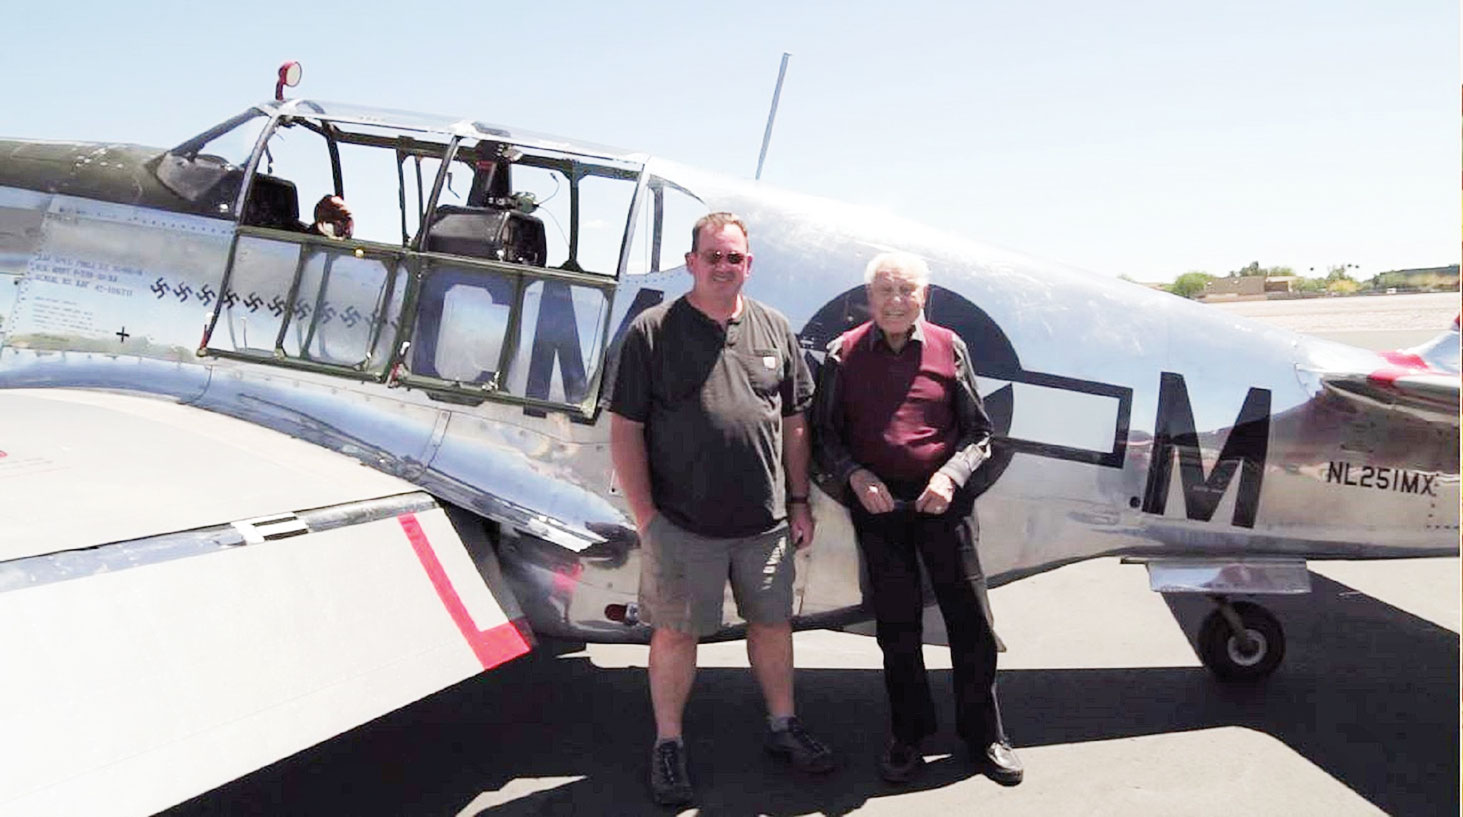 Fred Klein (right) checks flying a P-51 Mustang off his bucket list (shown with his co-pilot).